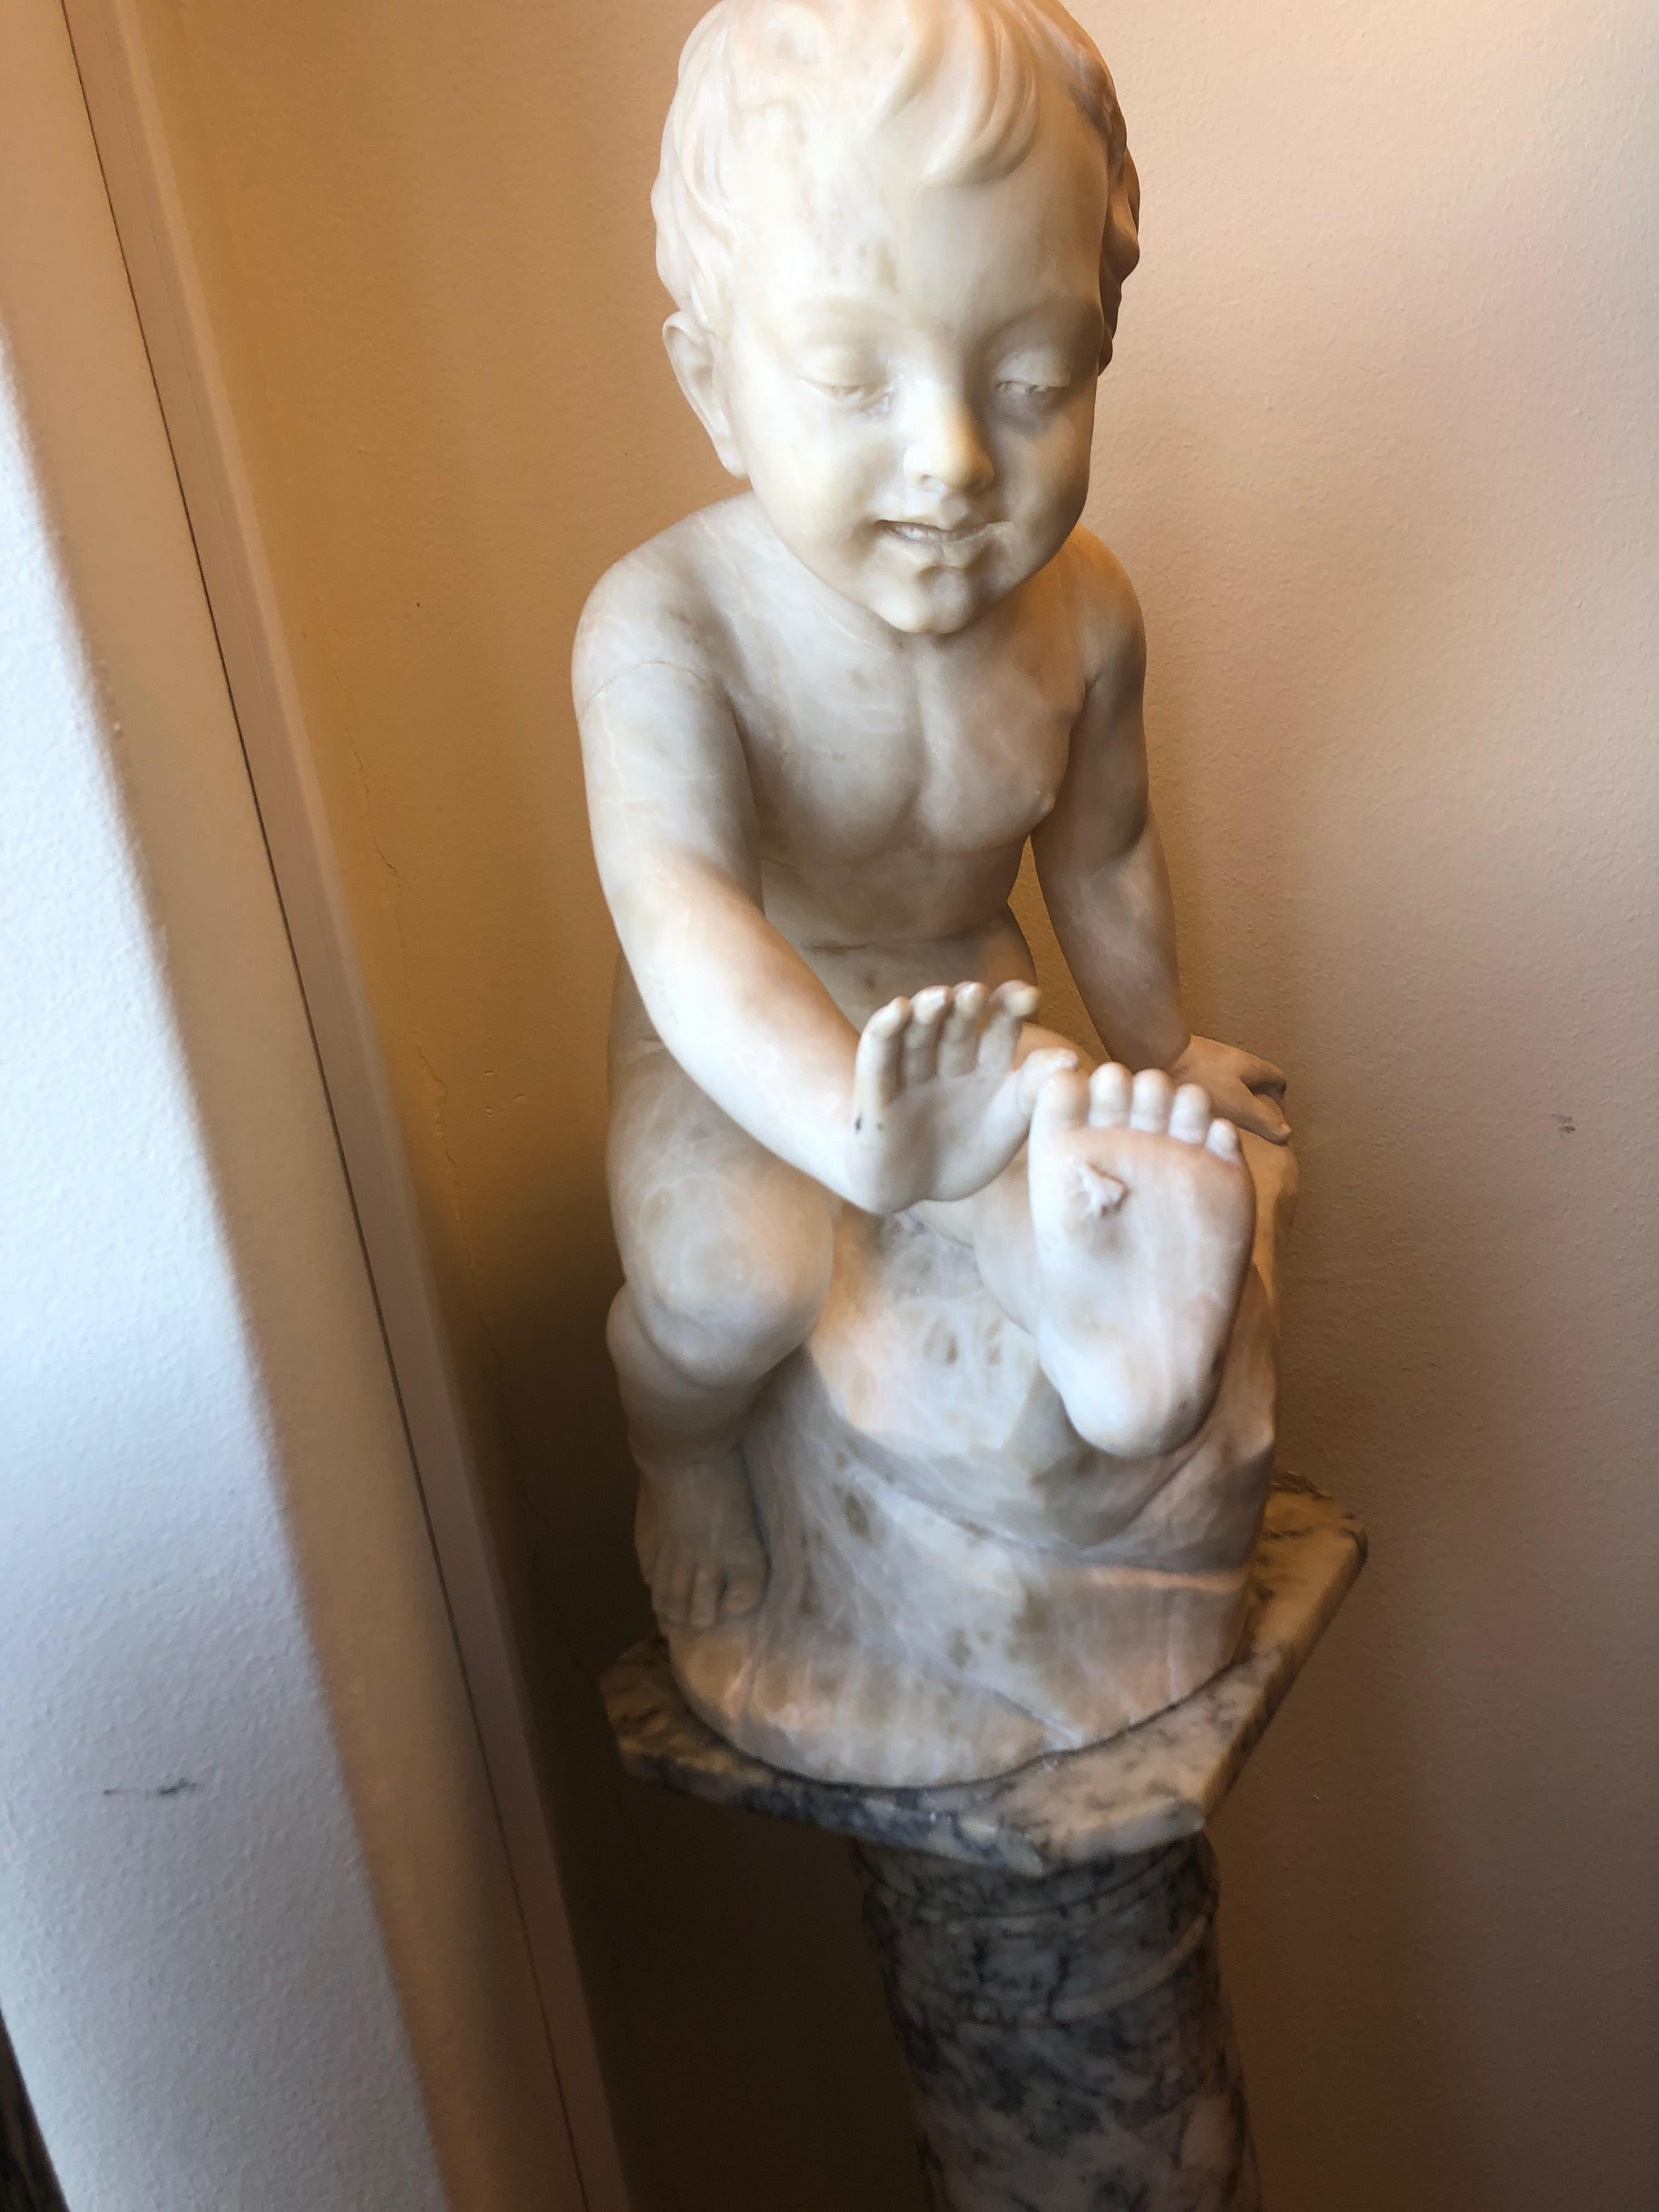 An amazing model depicting a sitting boy trying to catch a bee on his foot. Sculptured of marble and coming with its original pedestal also made of marble.